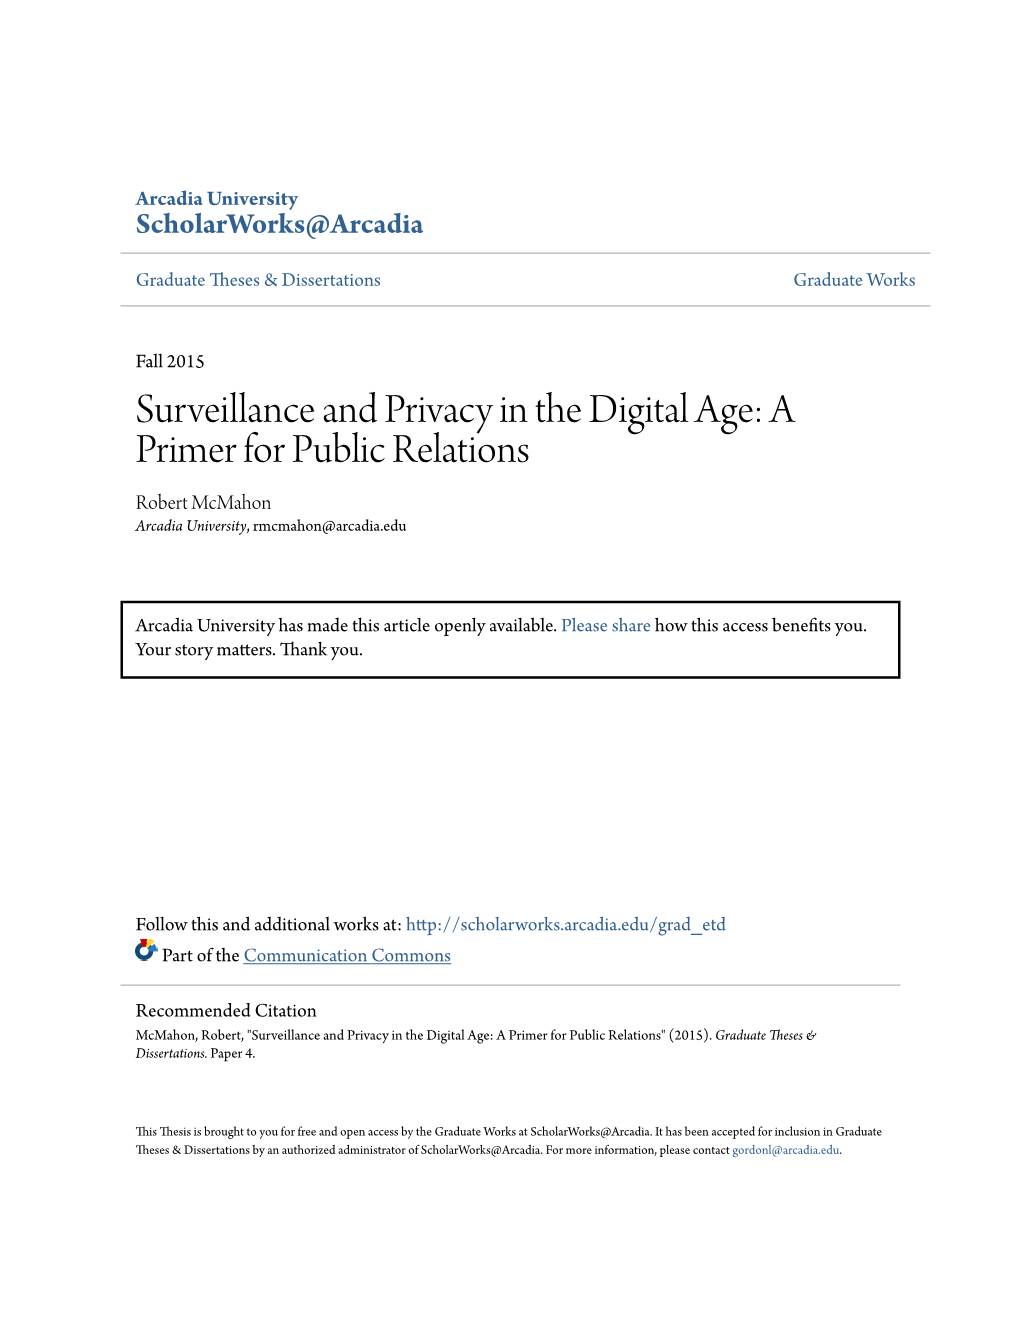 Surveillance and Privacy in the Digital Age: a Primer for Public Relations Robert Mcmahon Arcadia University, Rmcmahon@Arcadia.Edu